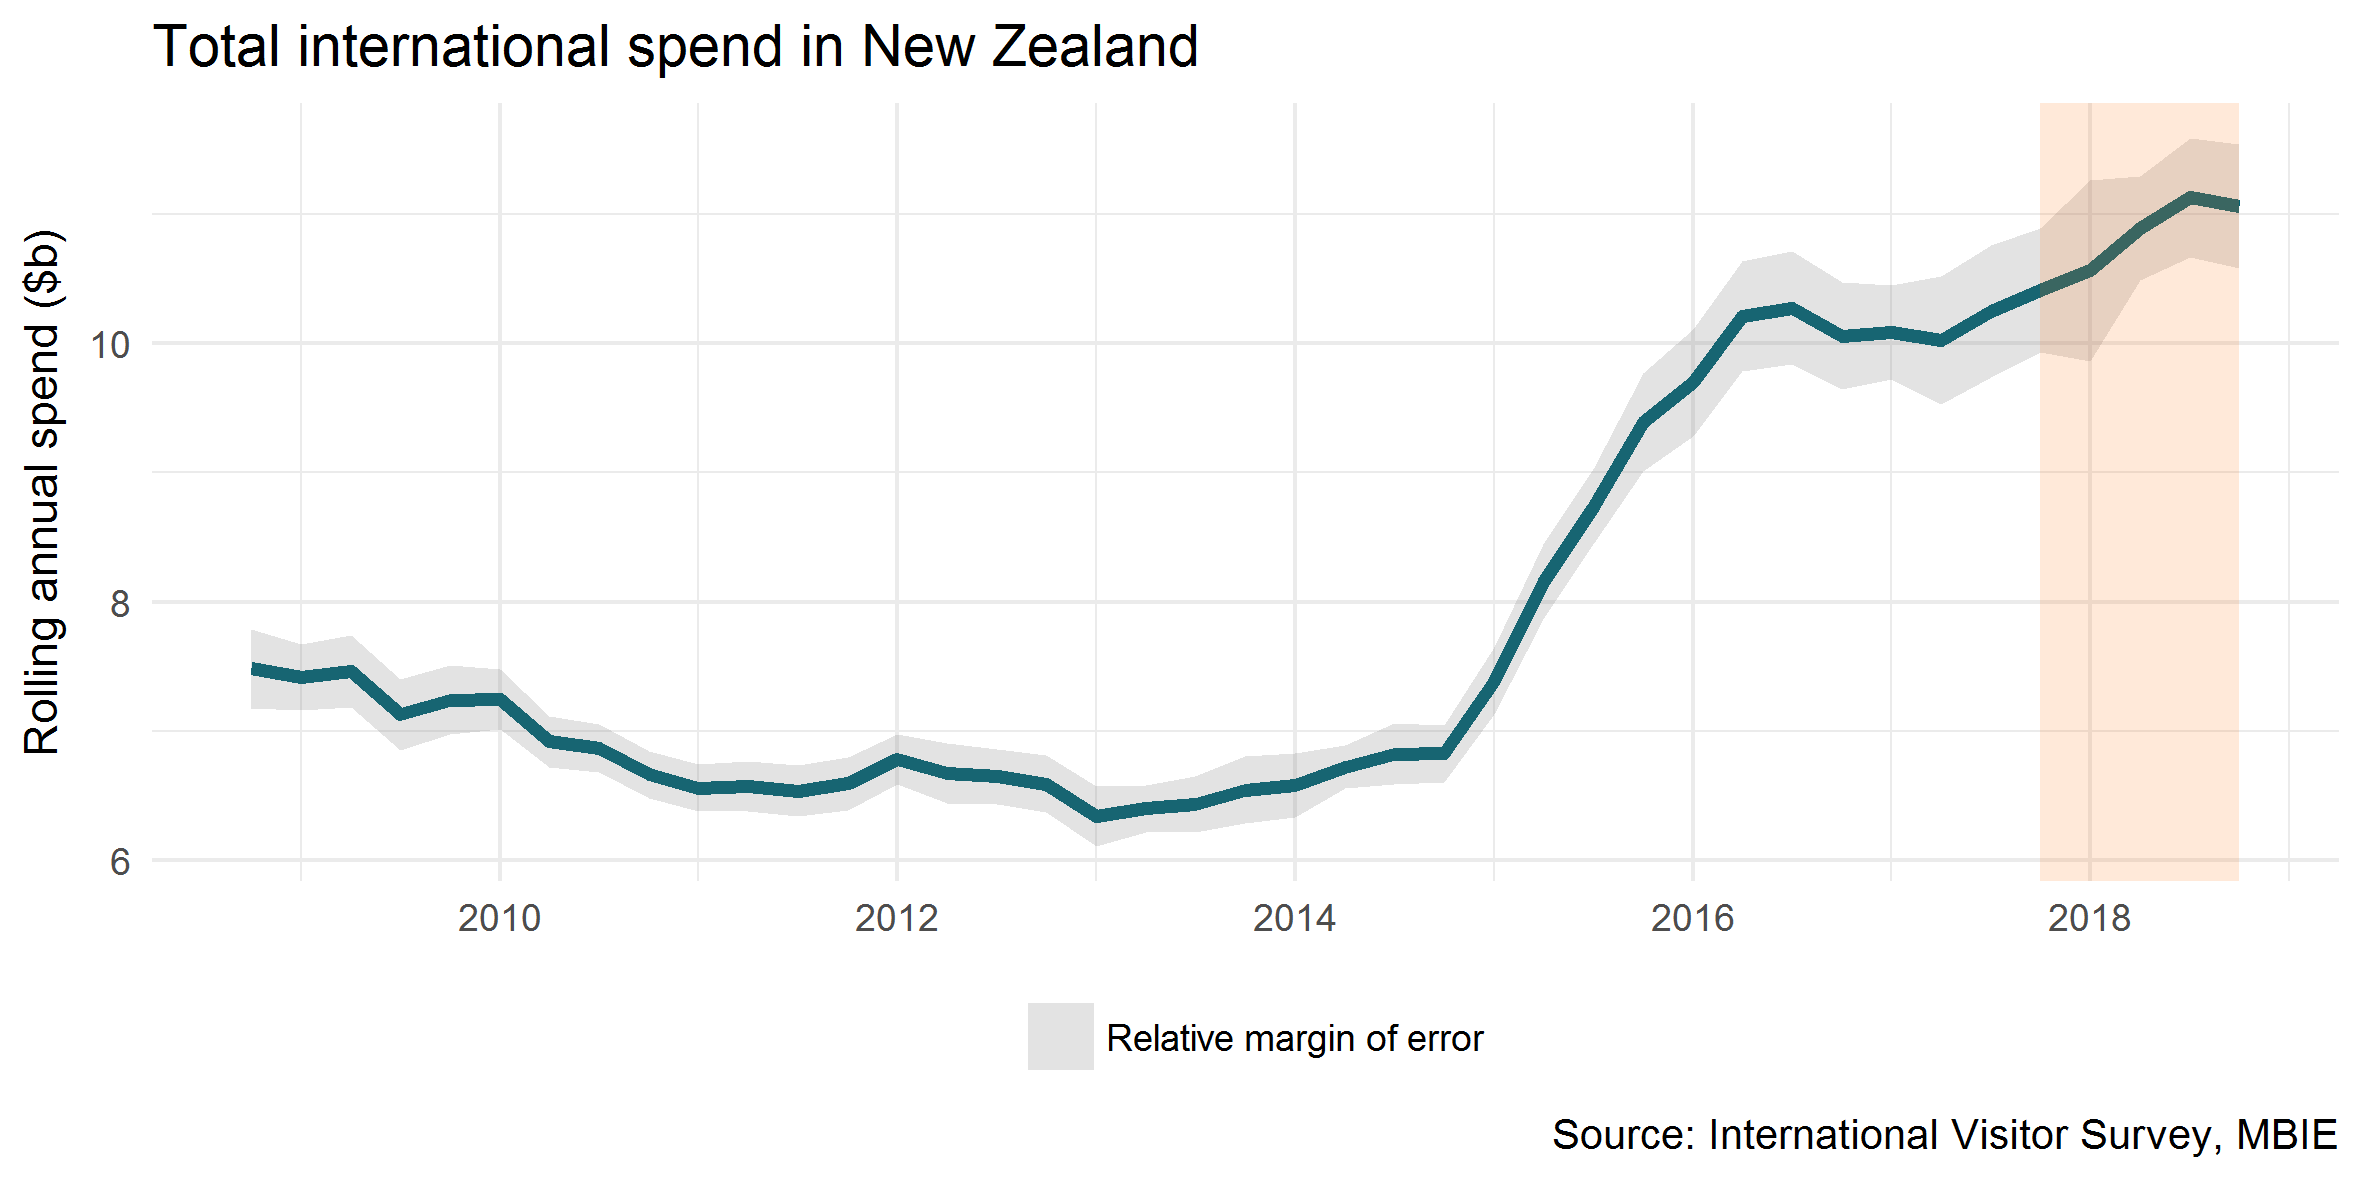 Total international spend in New Zealand